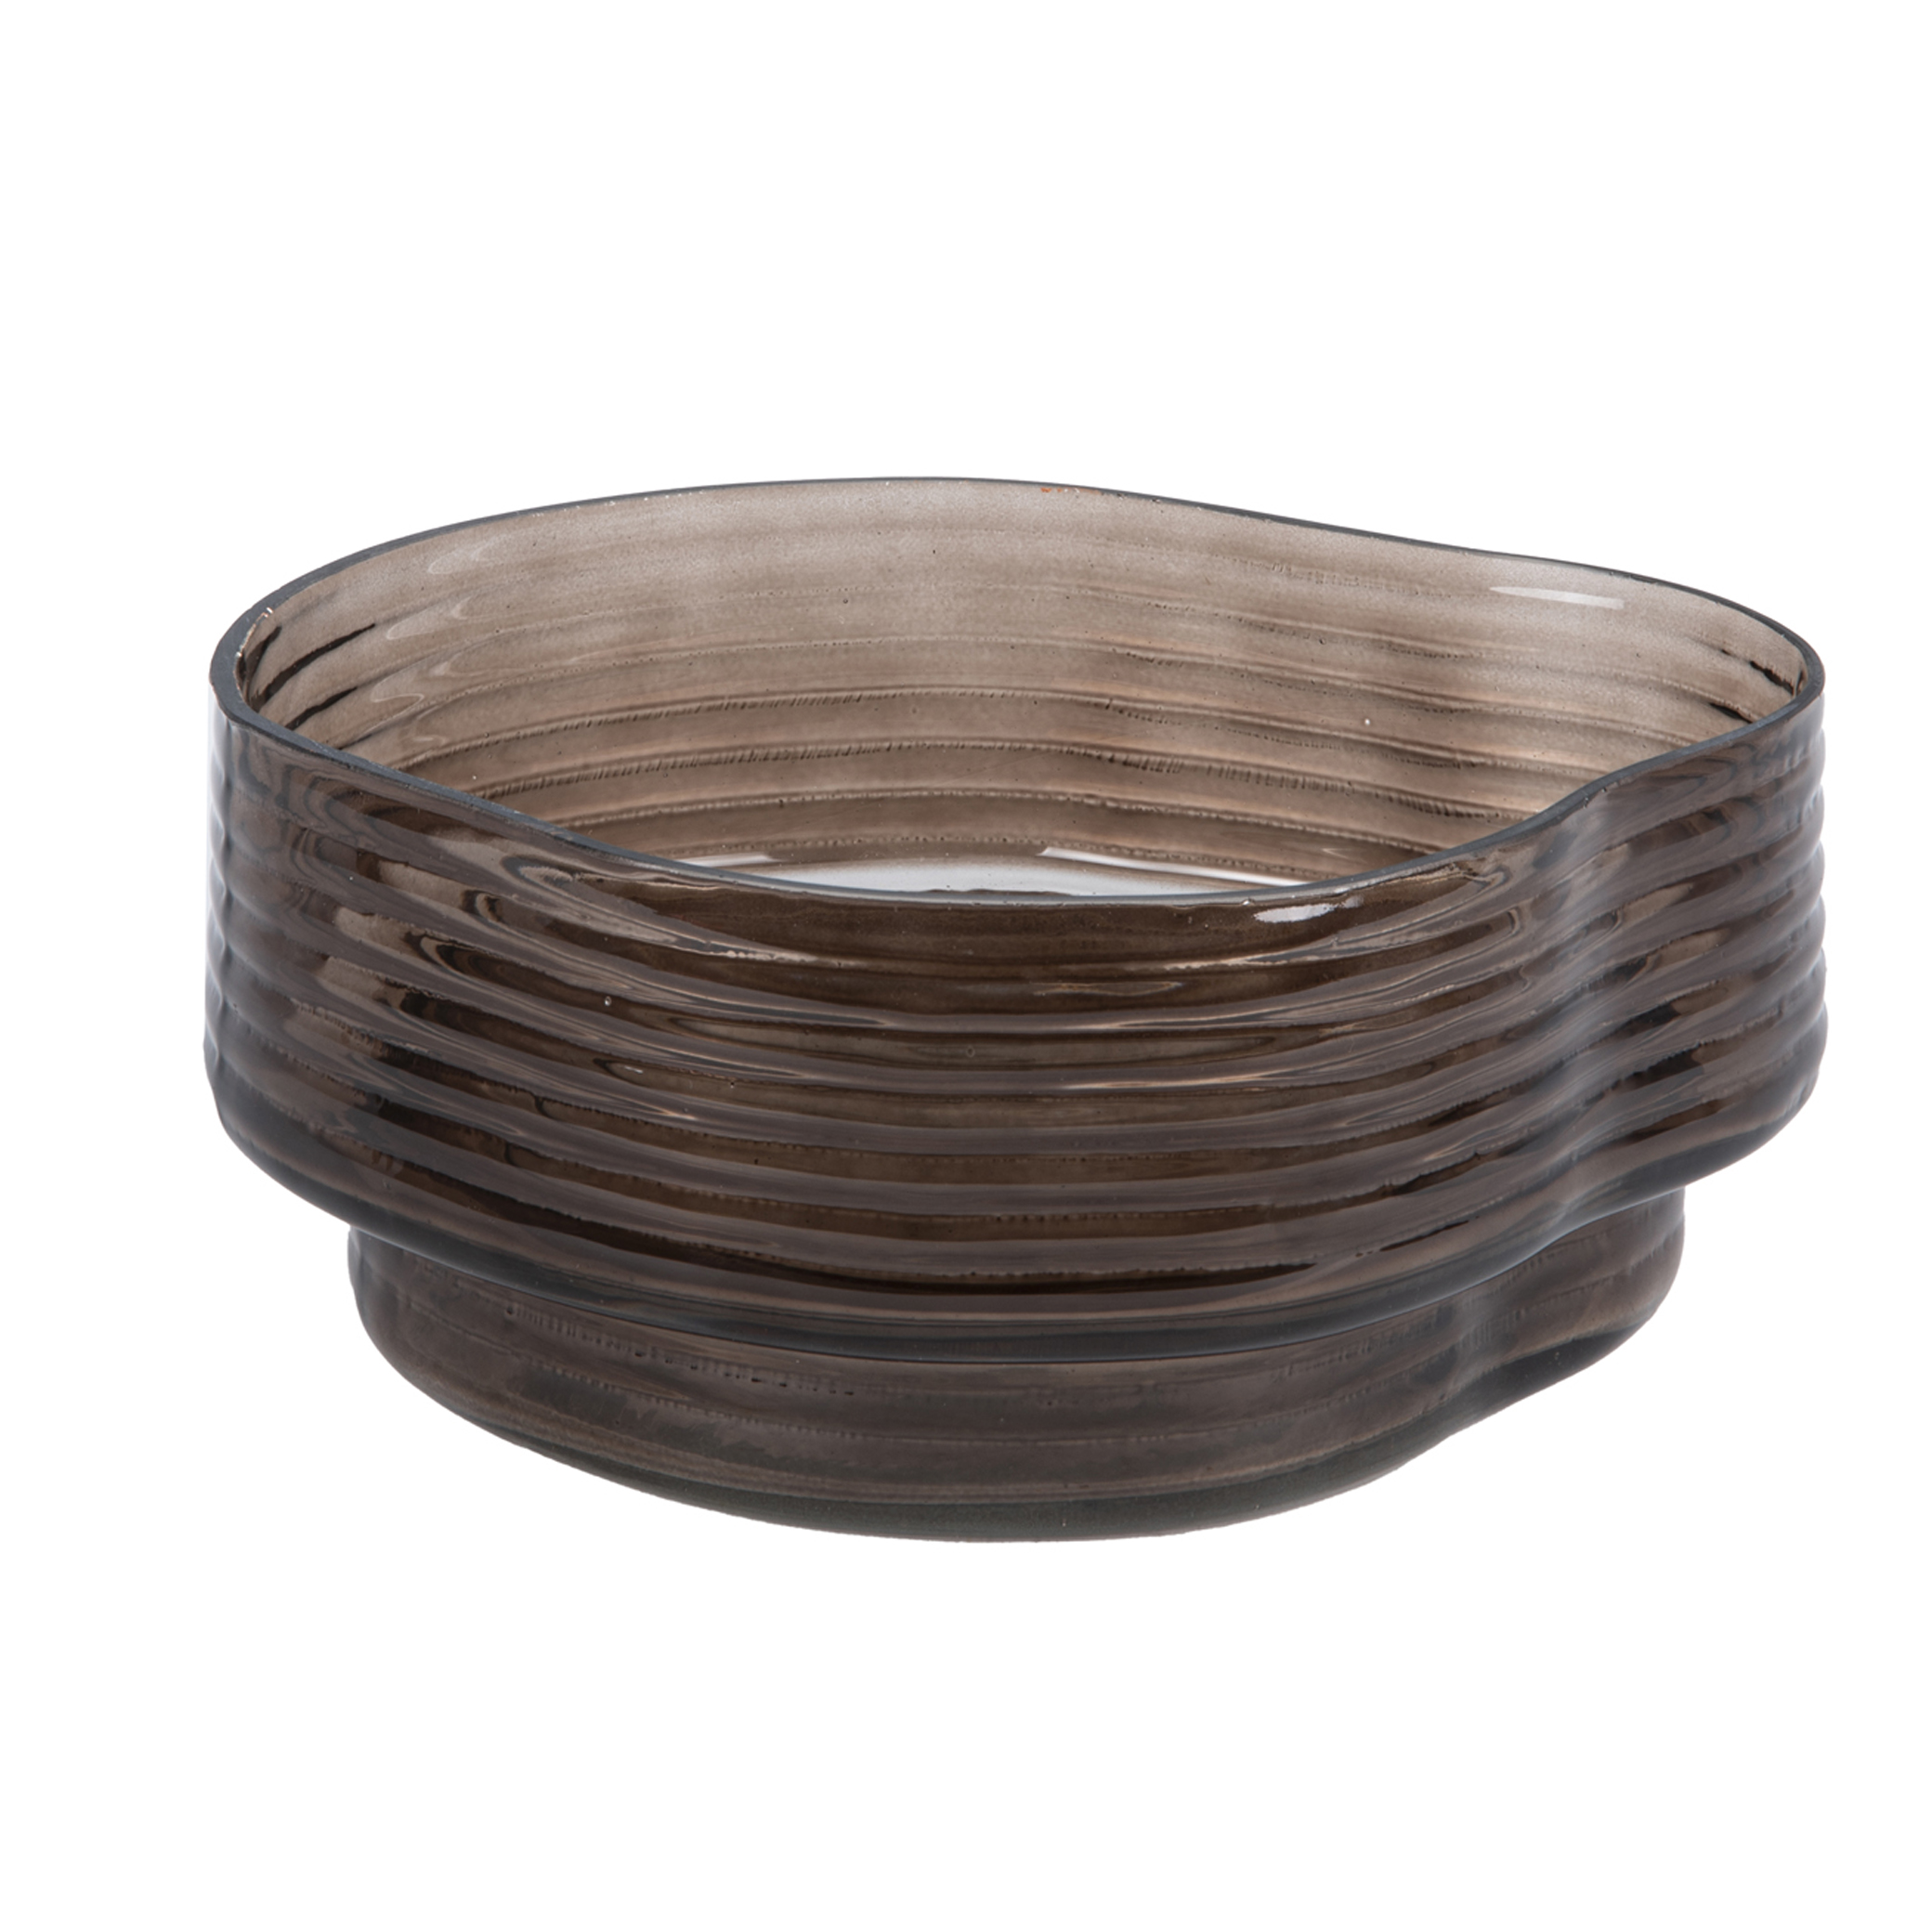 present-time-wave-bowl-chocolate-brown